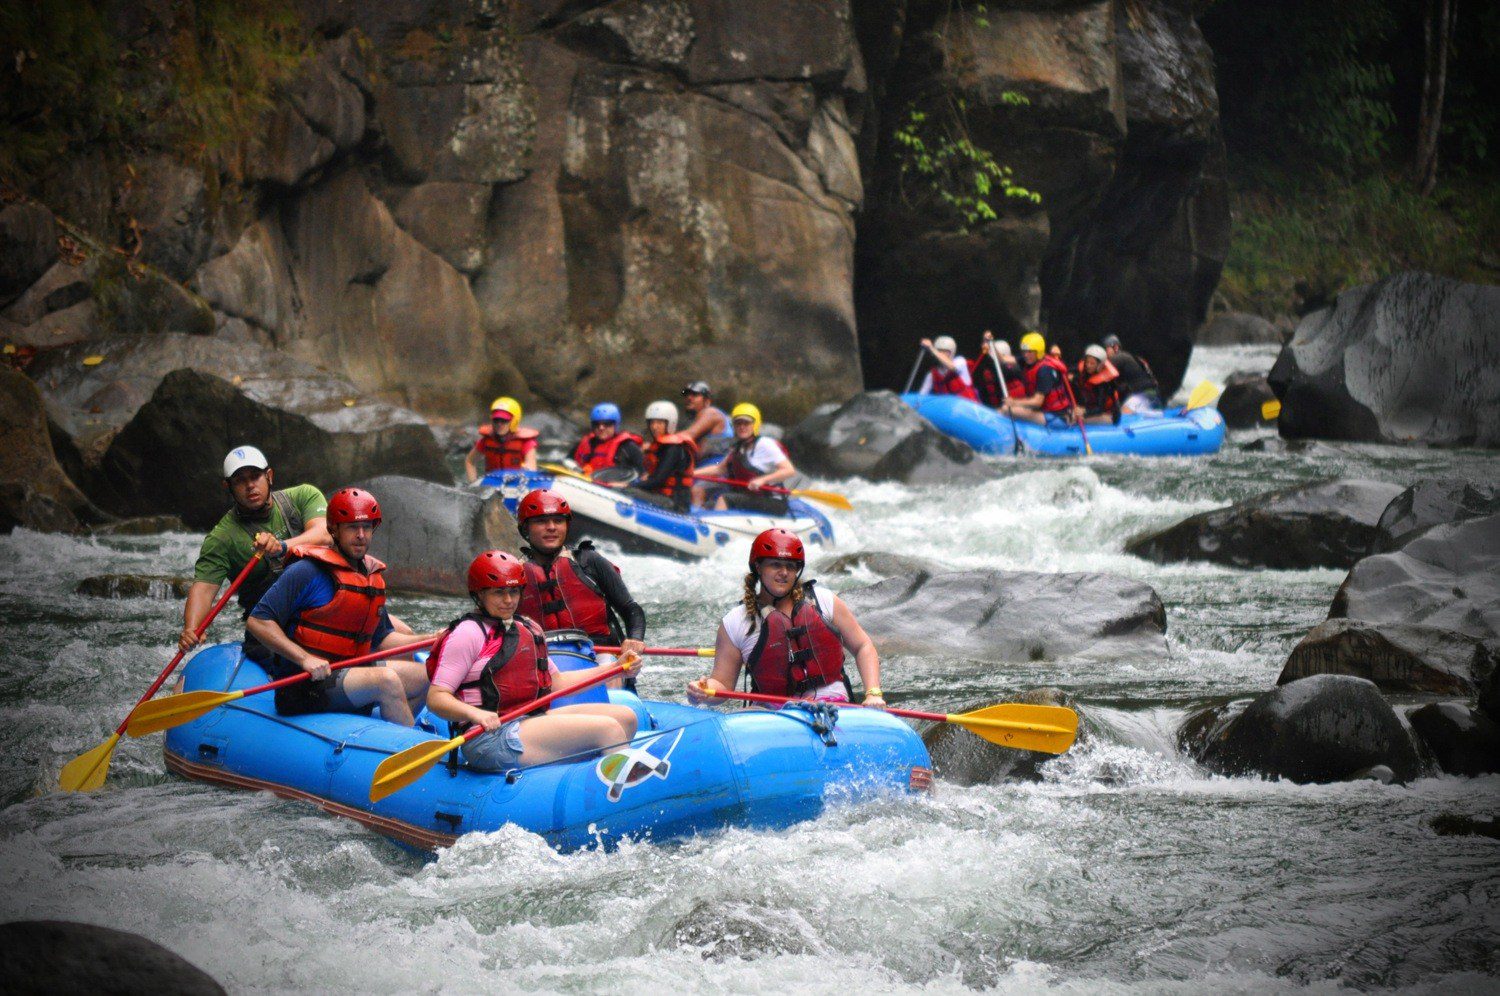 Would you go white water rafting?